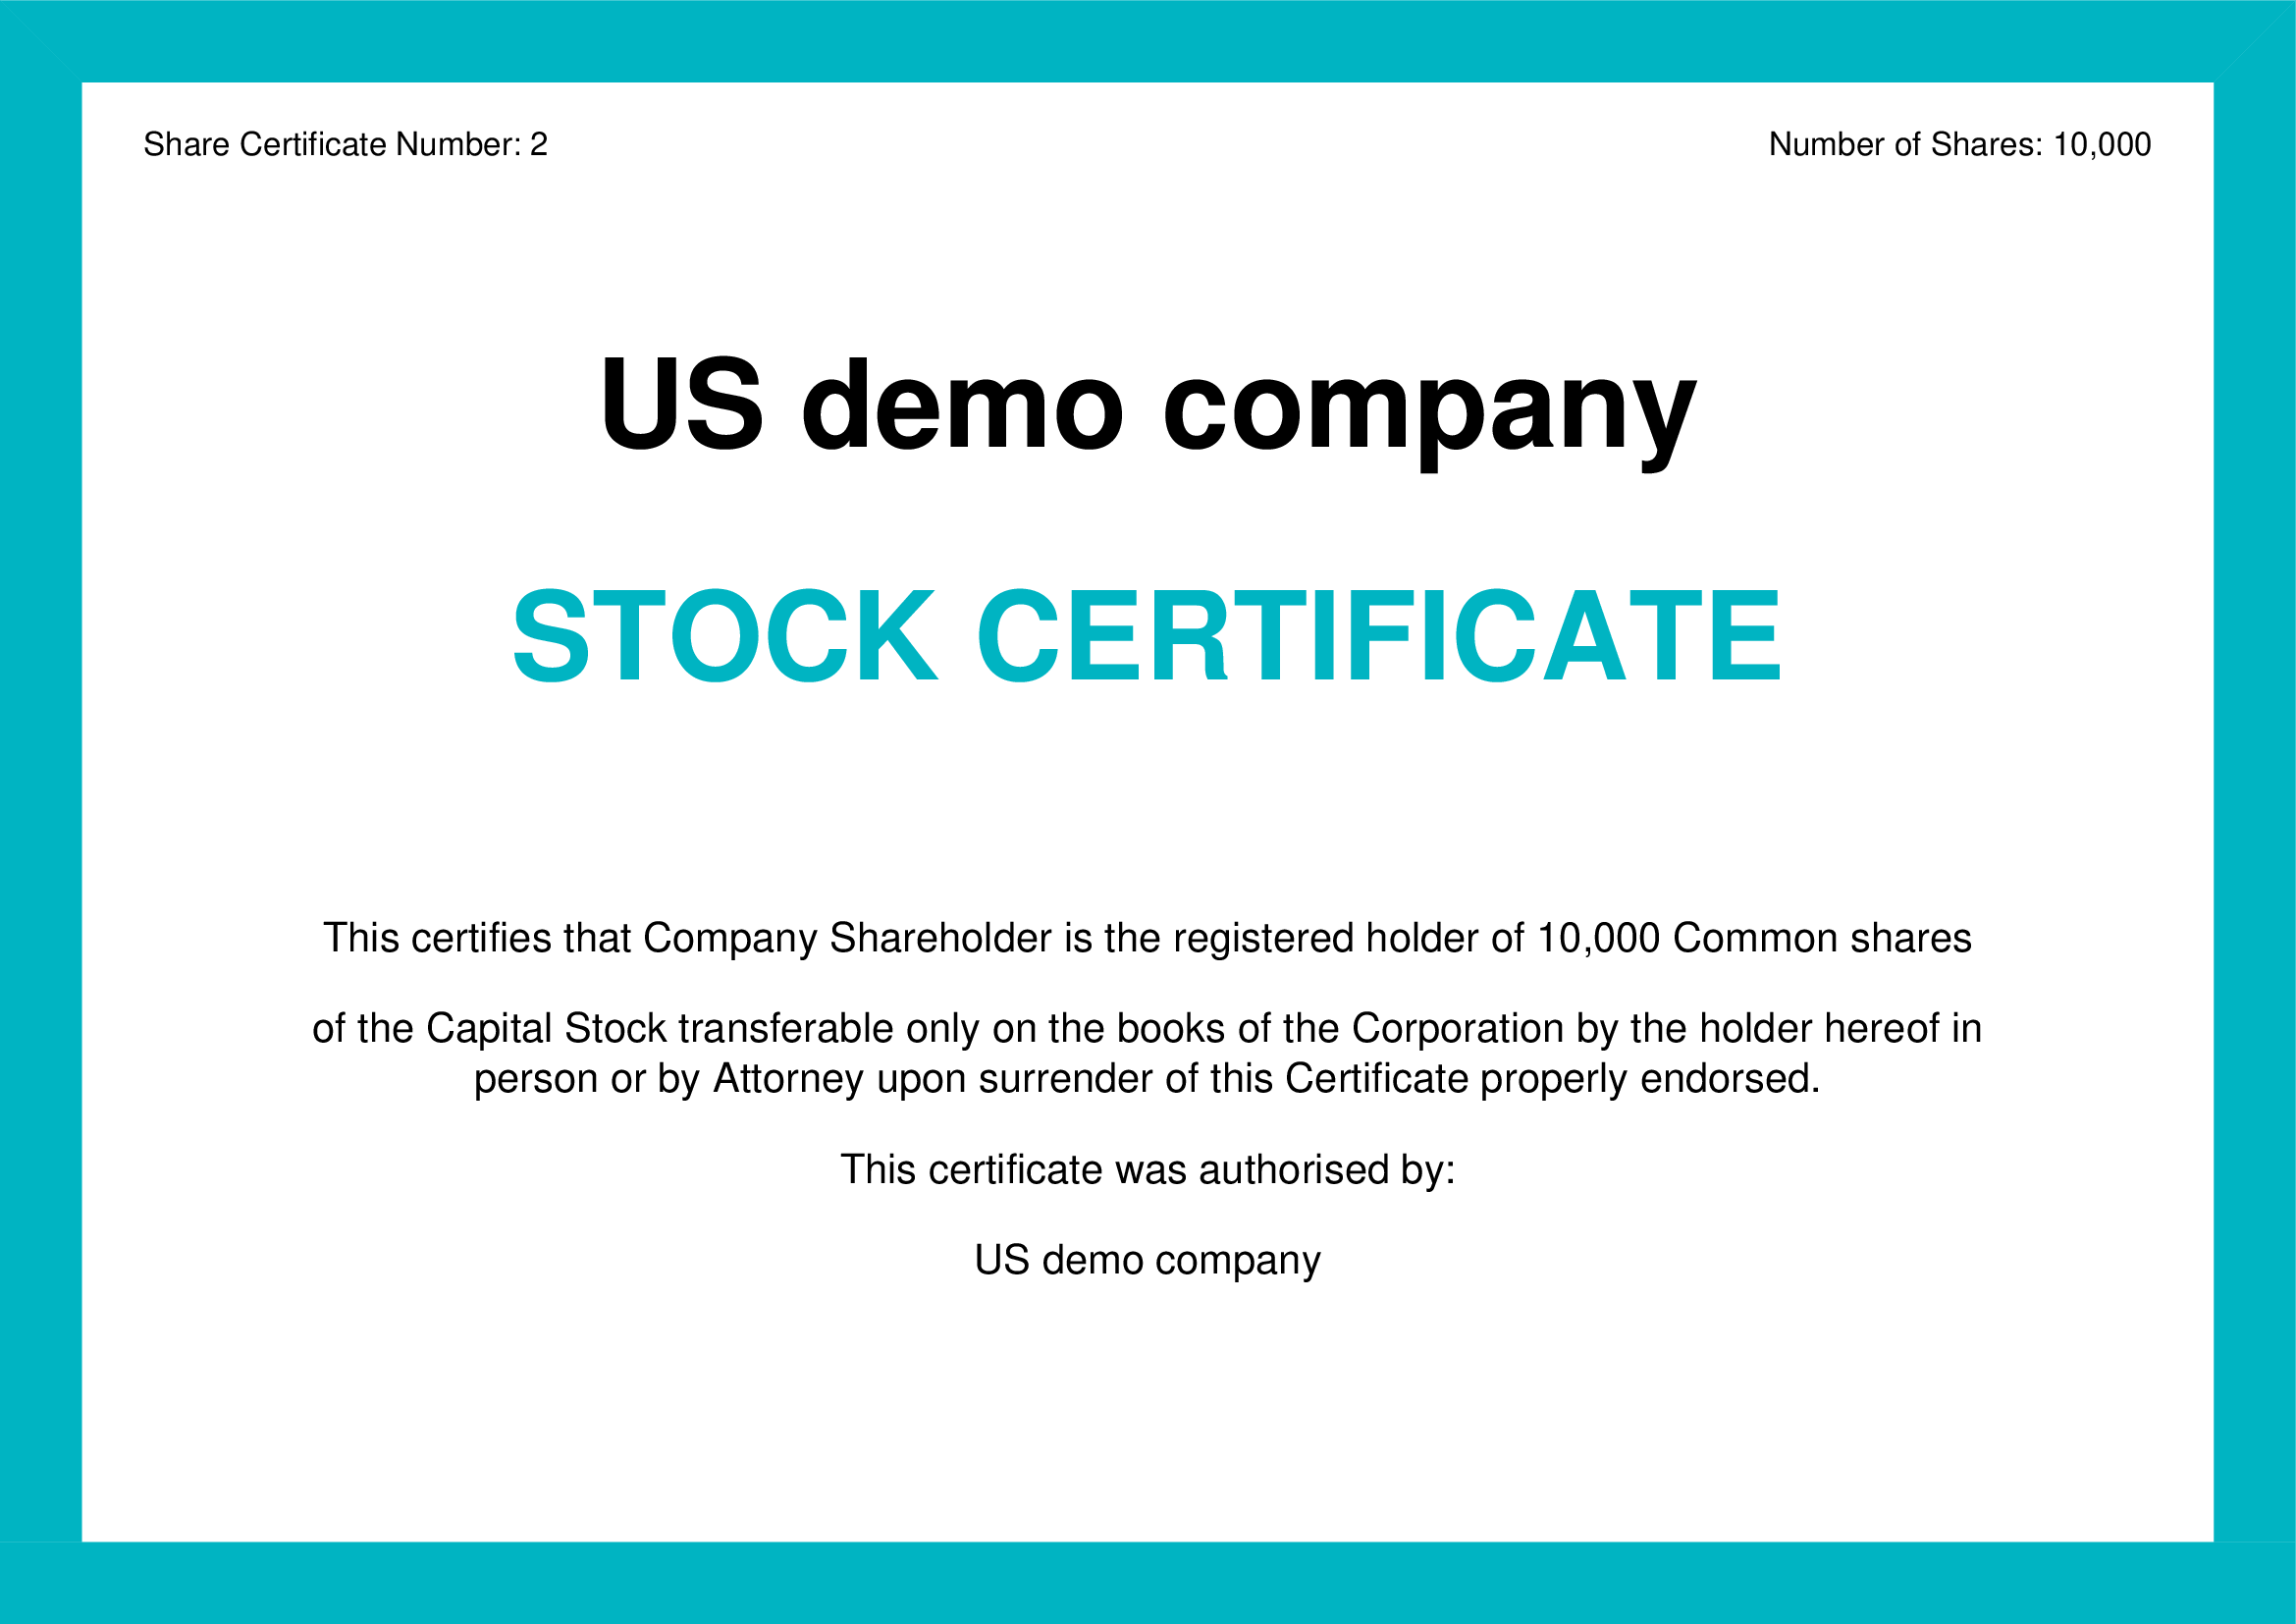 Form of Class A common stock certificate of the registrant